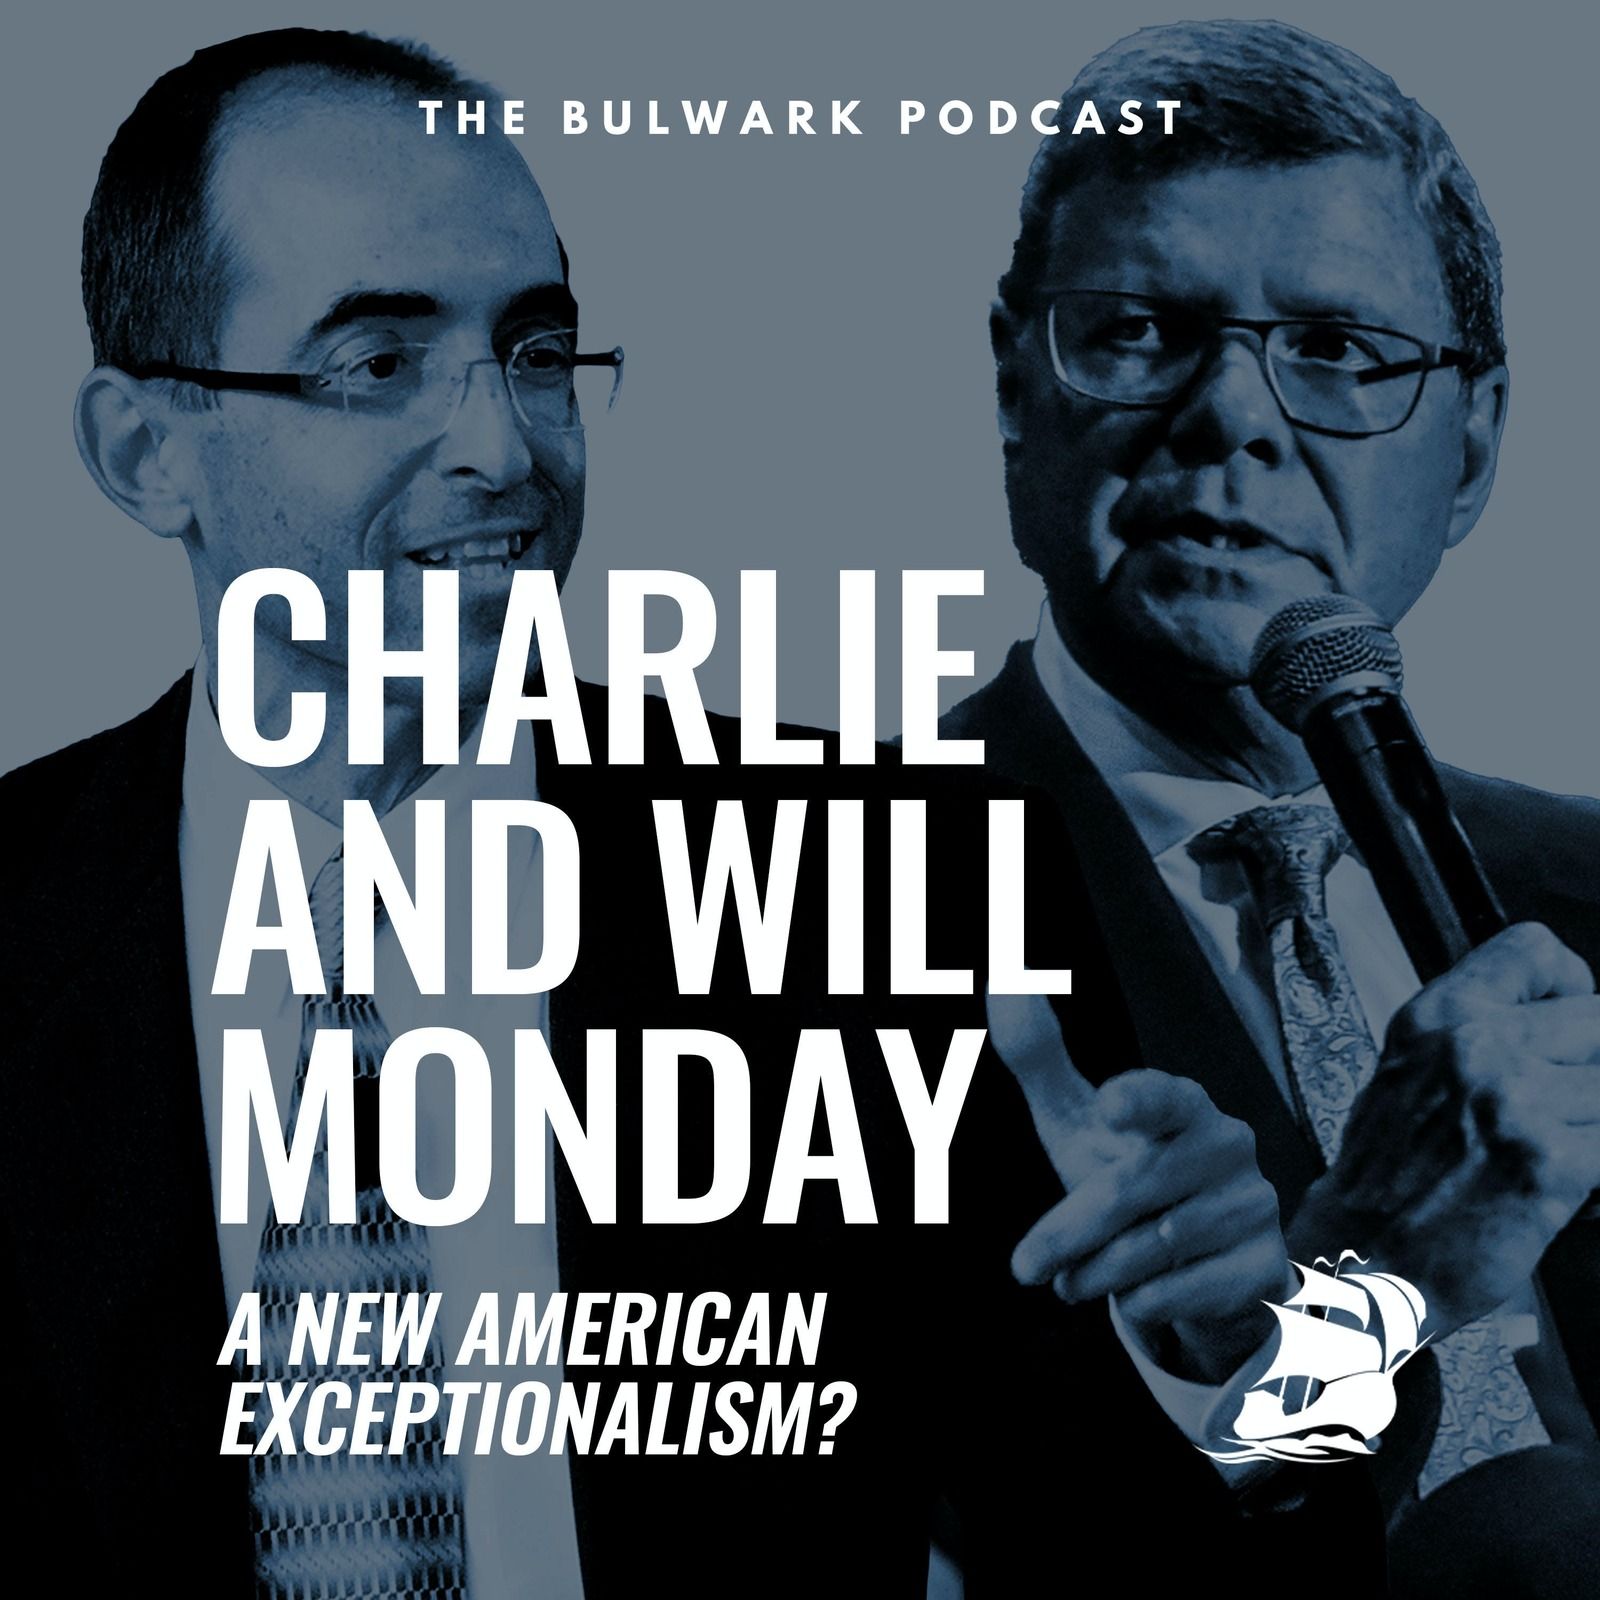 Will Saletan: A New American Exceptionalism? by The Bulwark Podcast